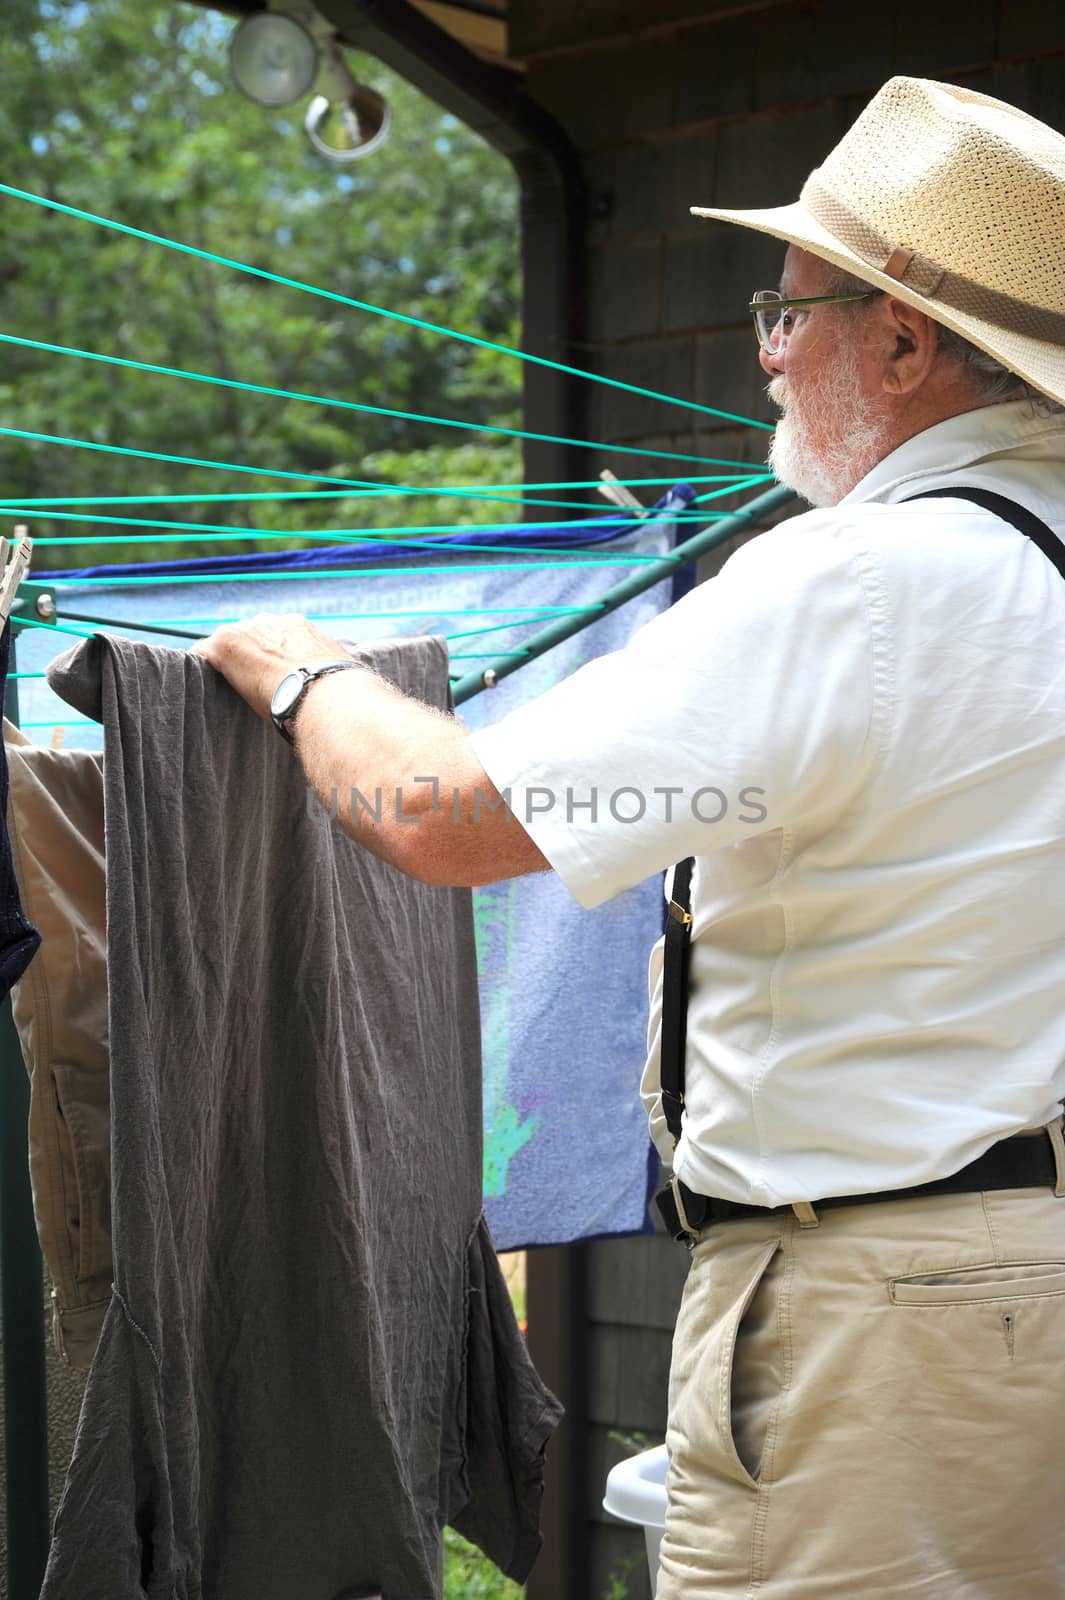 Country gentleman washing and line drying clothes outside.